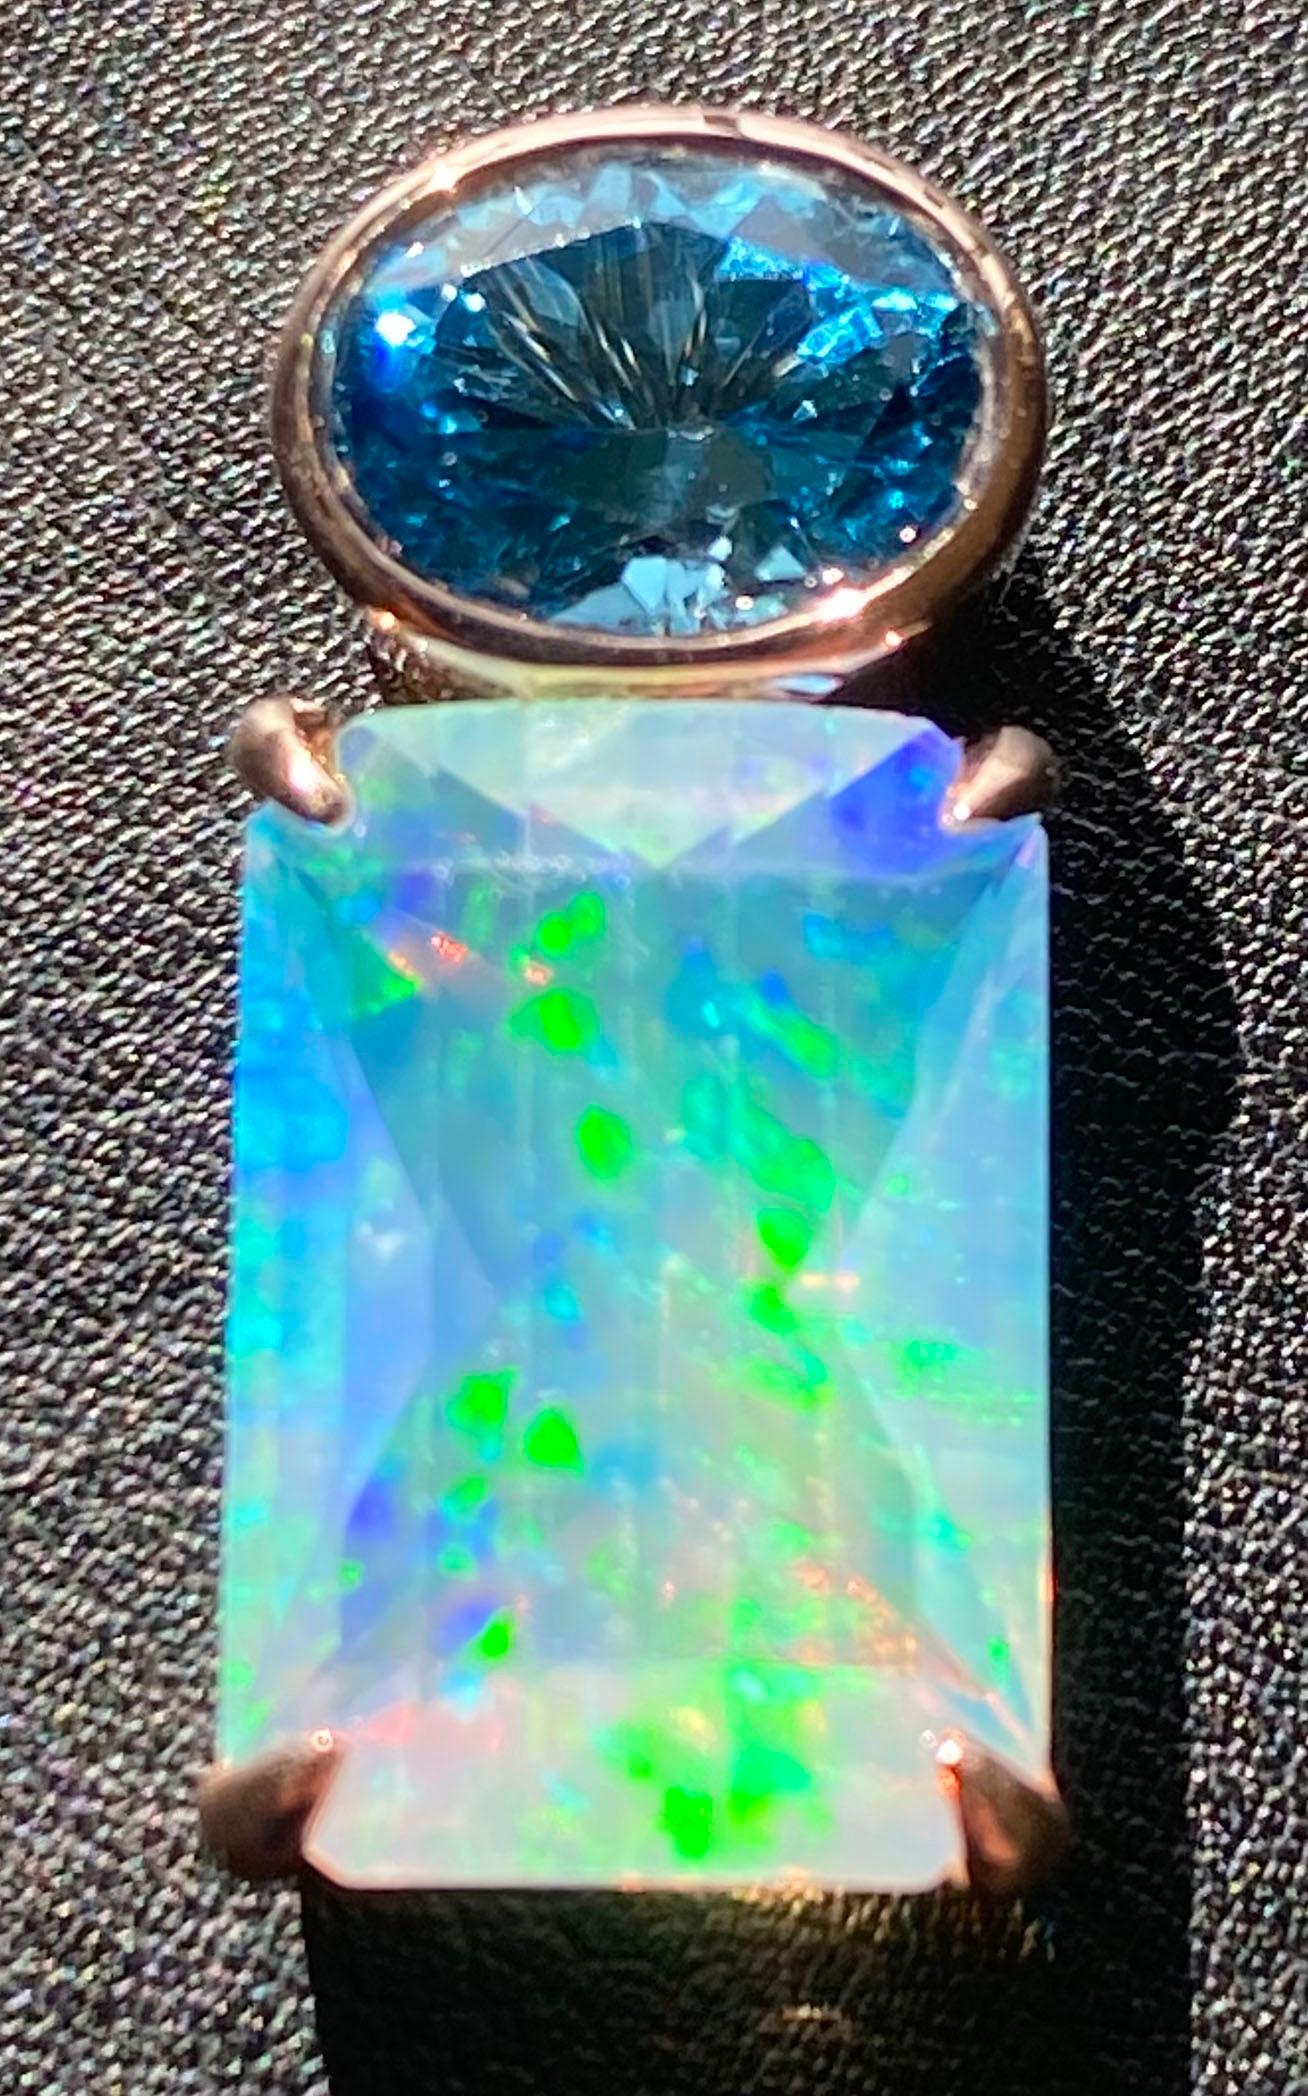 Topaz & Opal Pendant set in 14kt Rose Gold. This lovely pendant hangs from an 18